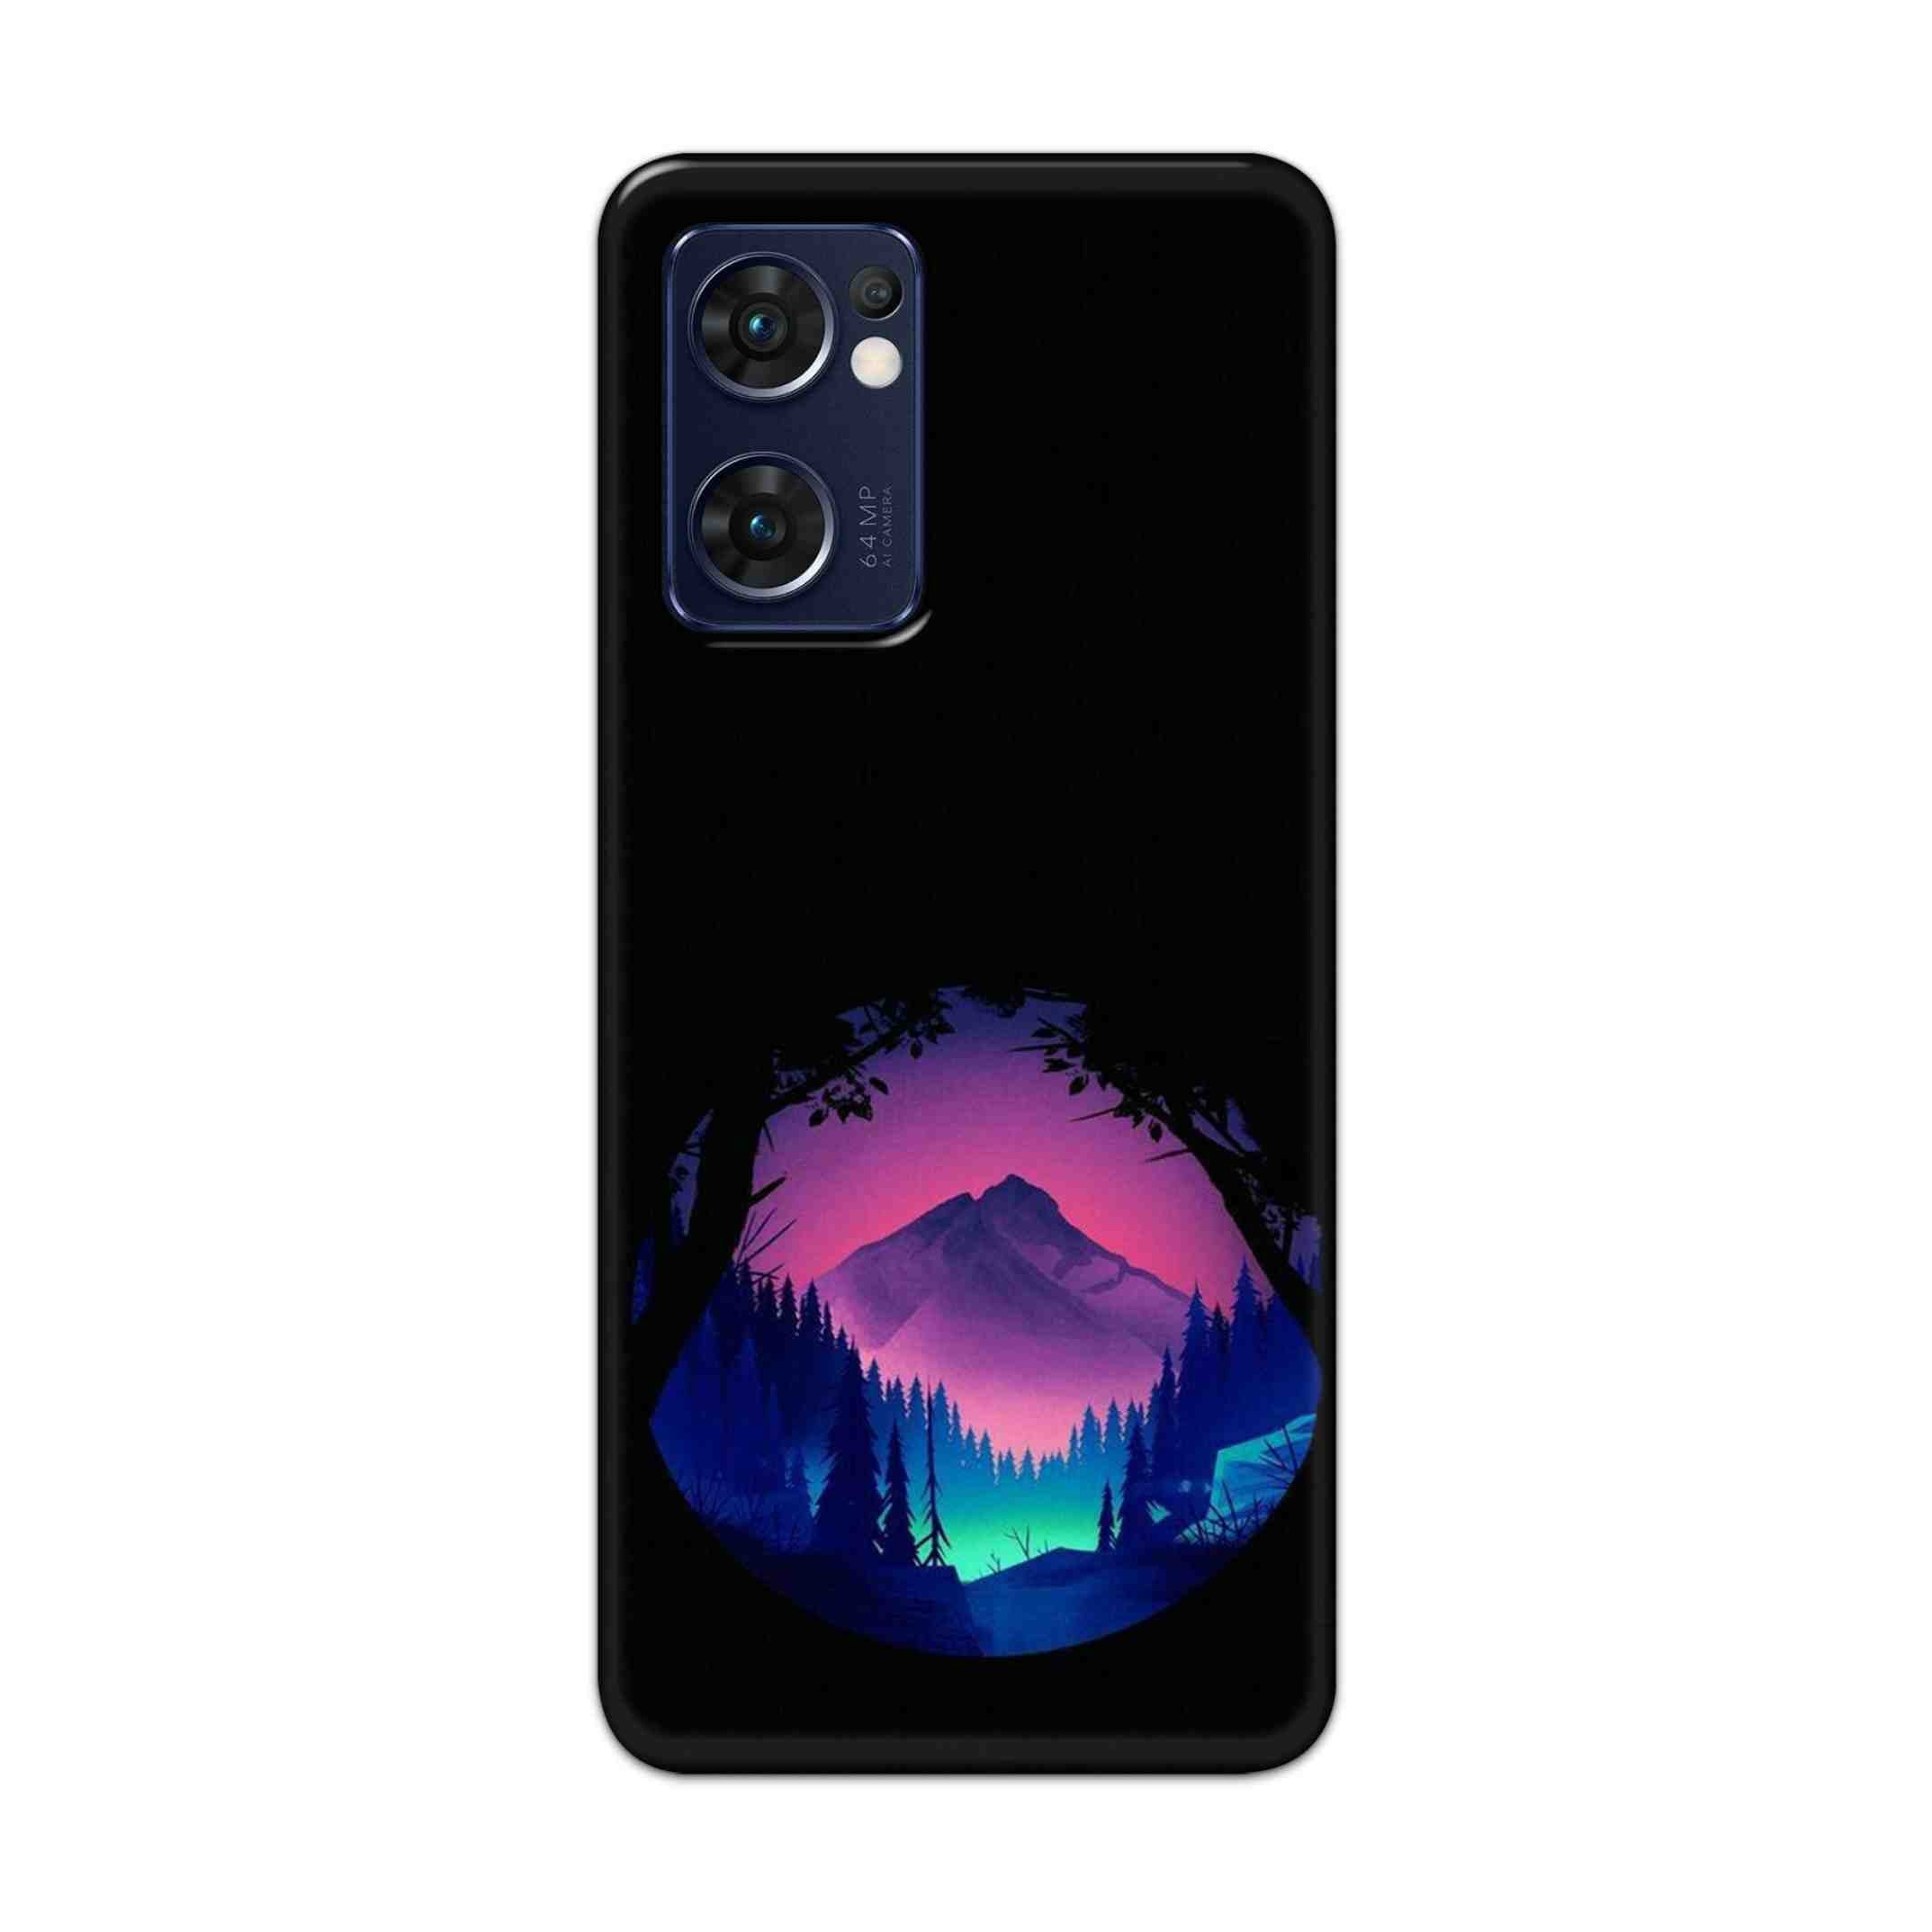 Buy Neon Tables Hard Back Mobile Phone Case Cover For Reno 7 5G Online